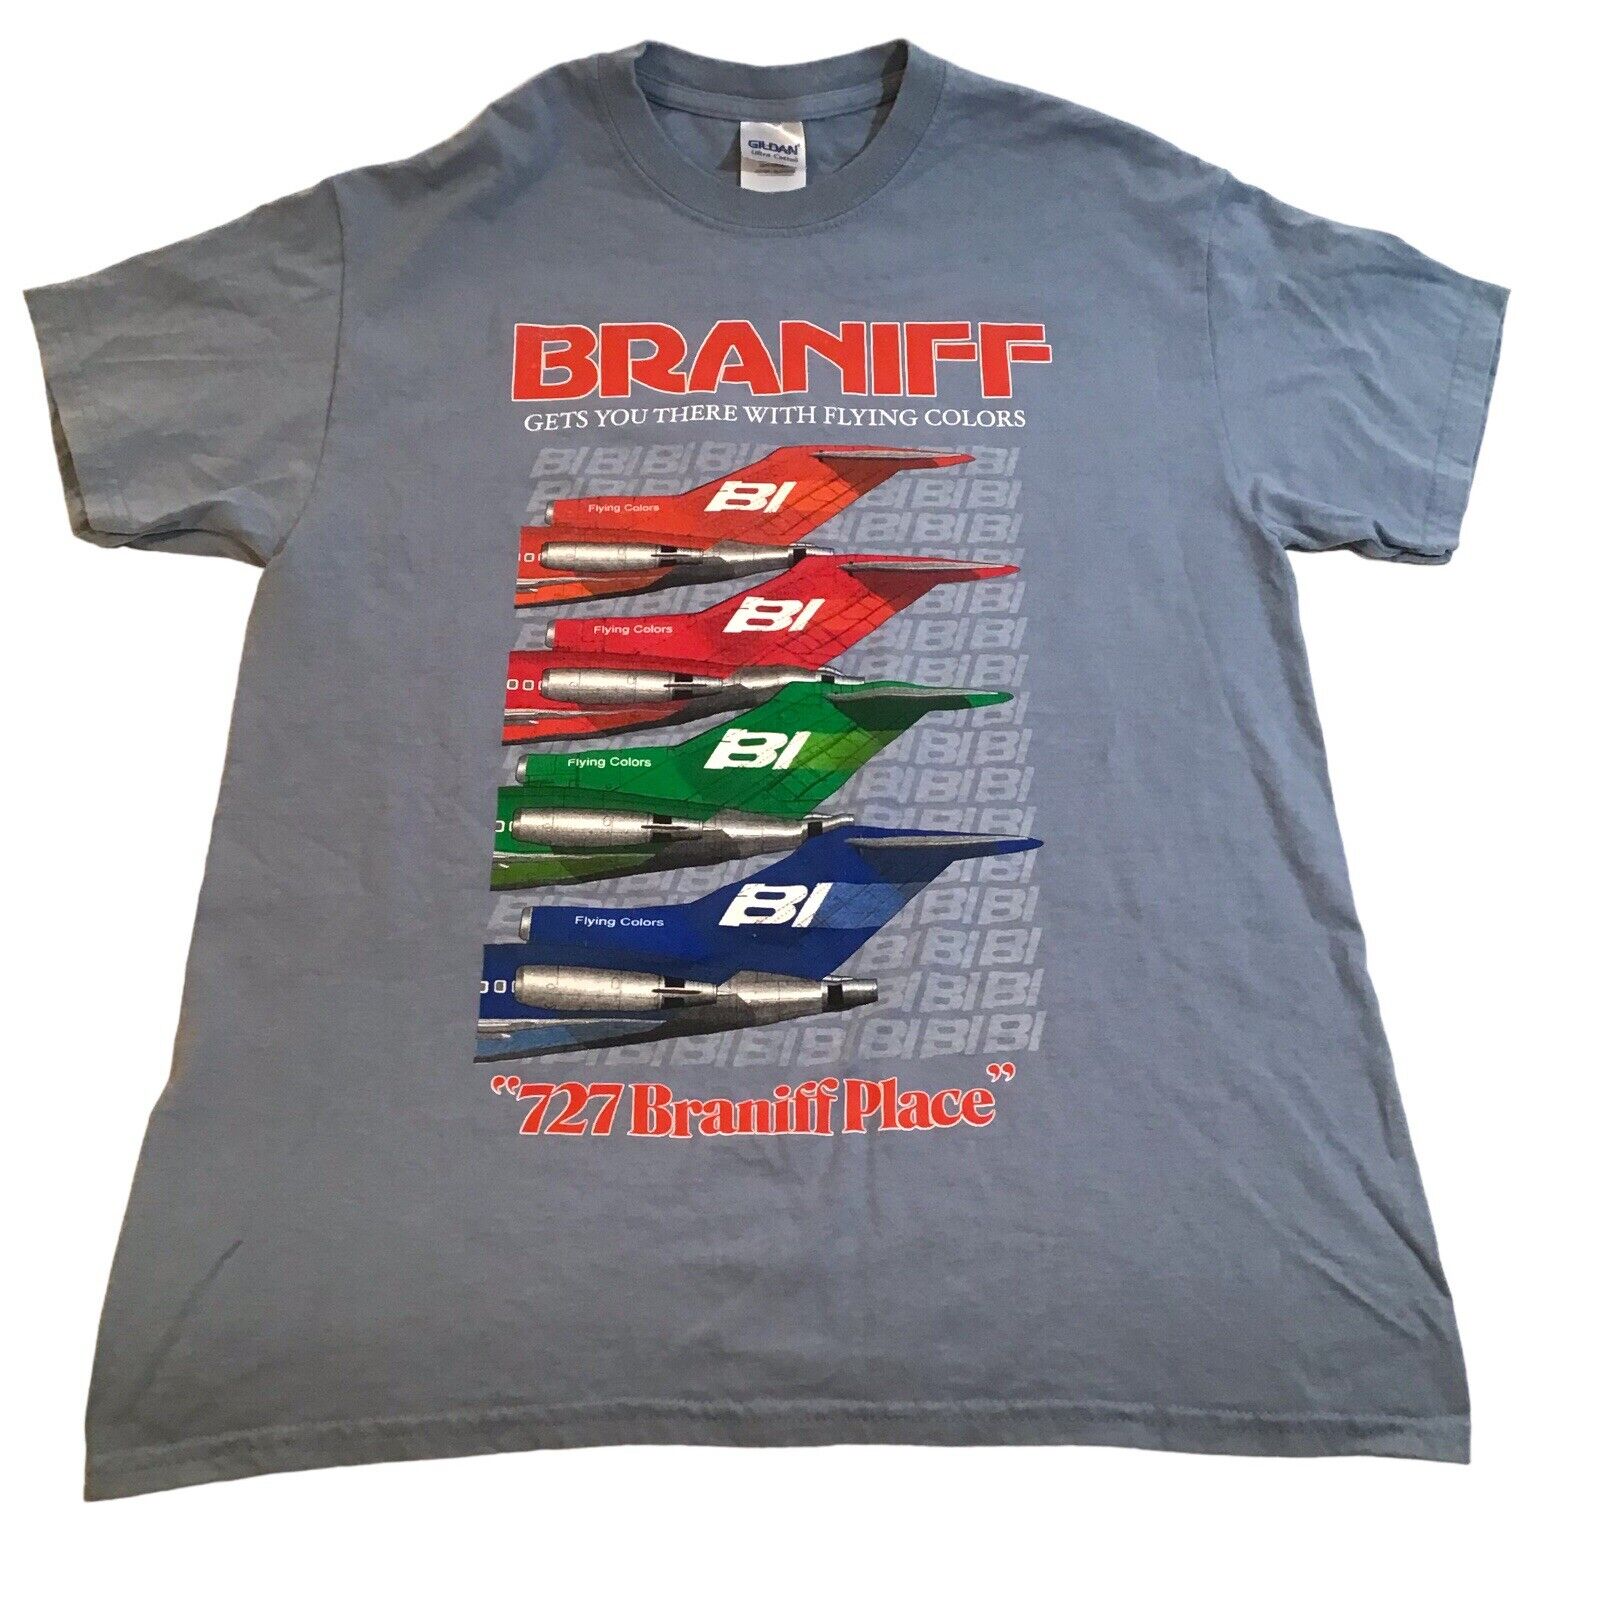 Vintage BRANIFF Airlines Advertising Logo  T-Shirt “727 Braniff Place” Size Med